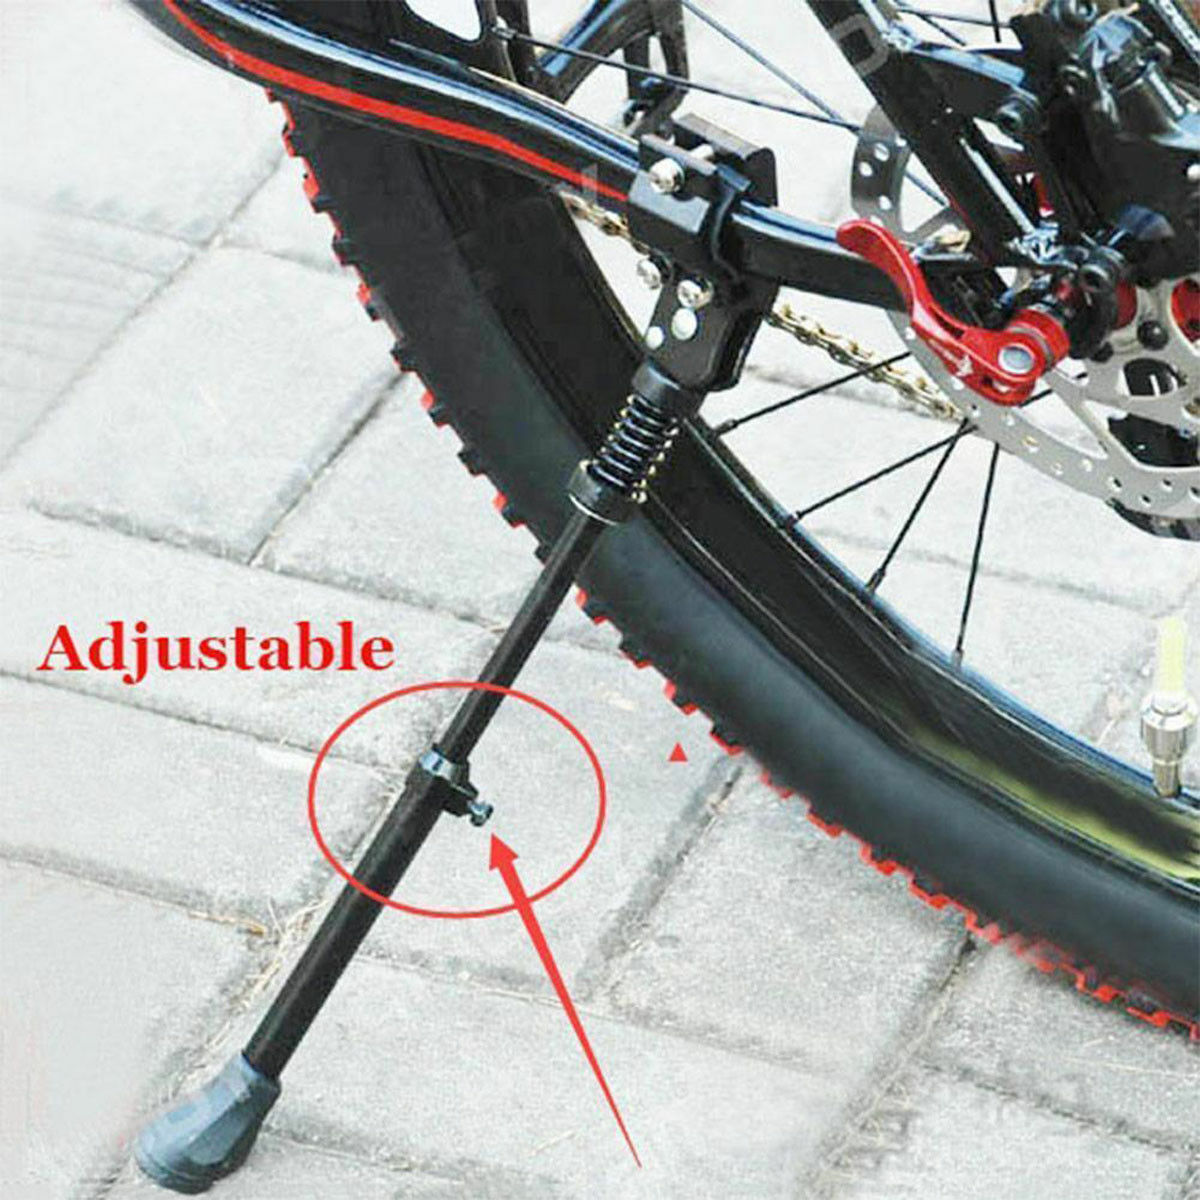 Weimoli 1PC Bike Stand Adjustable Adjustable MTB Road Bicycle Kickstand Bicycle Stand Support for Bicycle Anti-slip Rubber Foot Aluminum Alloy Mountain Bike Foot Kick Stand Black